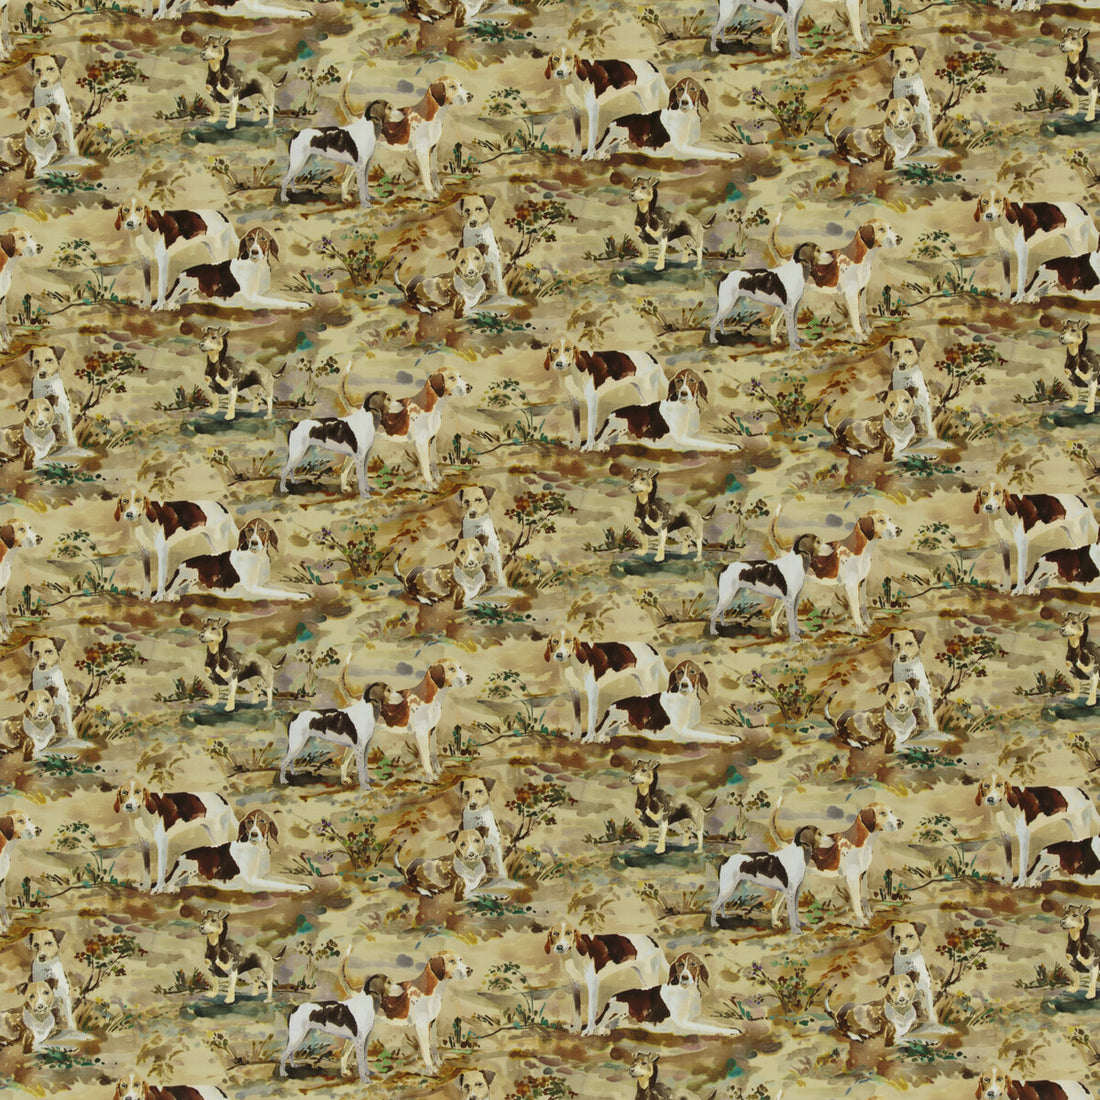 Mulberry Hounds Velvet fabric in multi color - pattern FD297.Y101.0 - by Mulberry in the Festival collection